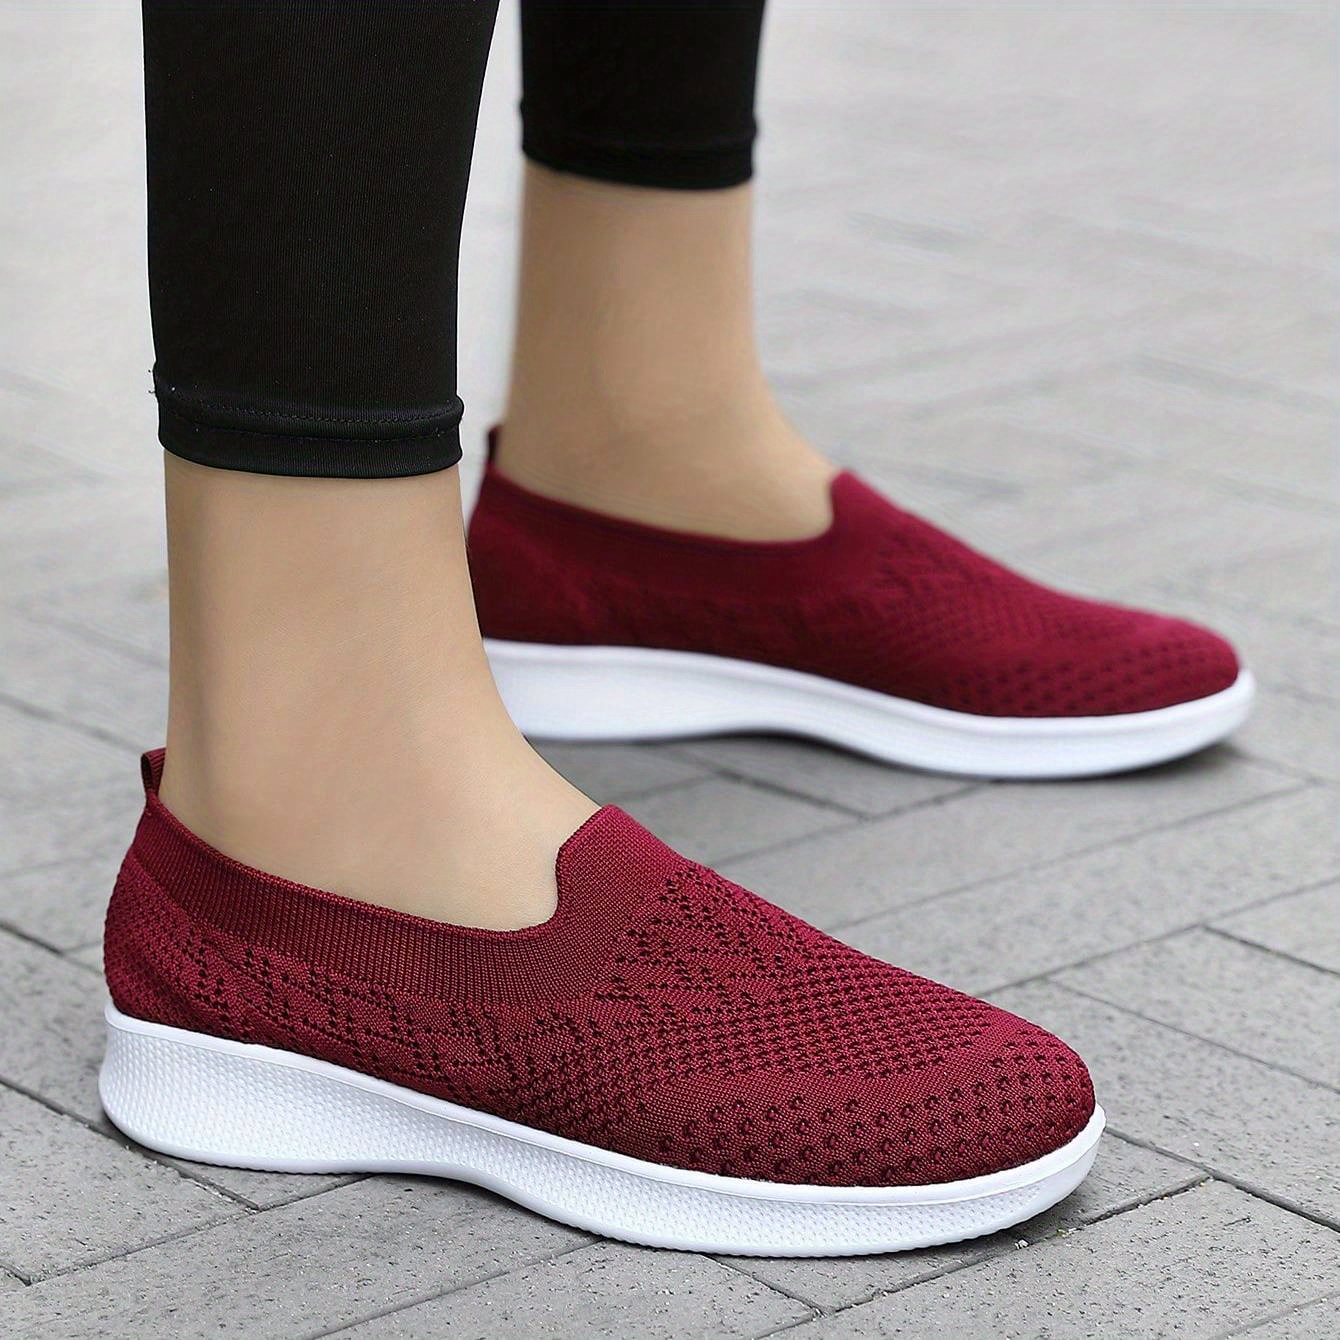 LSLJS Fashion Women Shoe Soft-Soled Comfortable Flying Woven Casual Ladies  Shoes, Women's Sneakers on Clearance